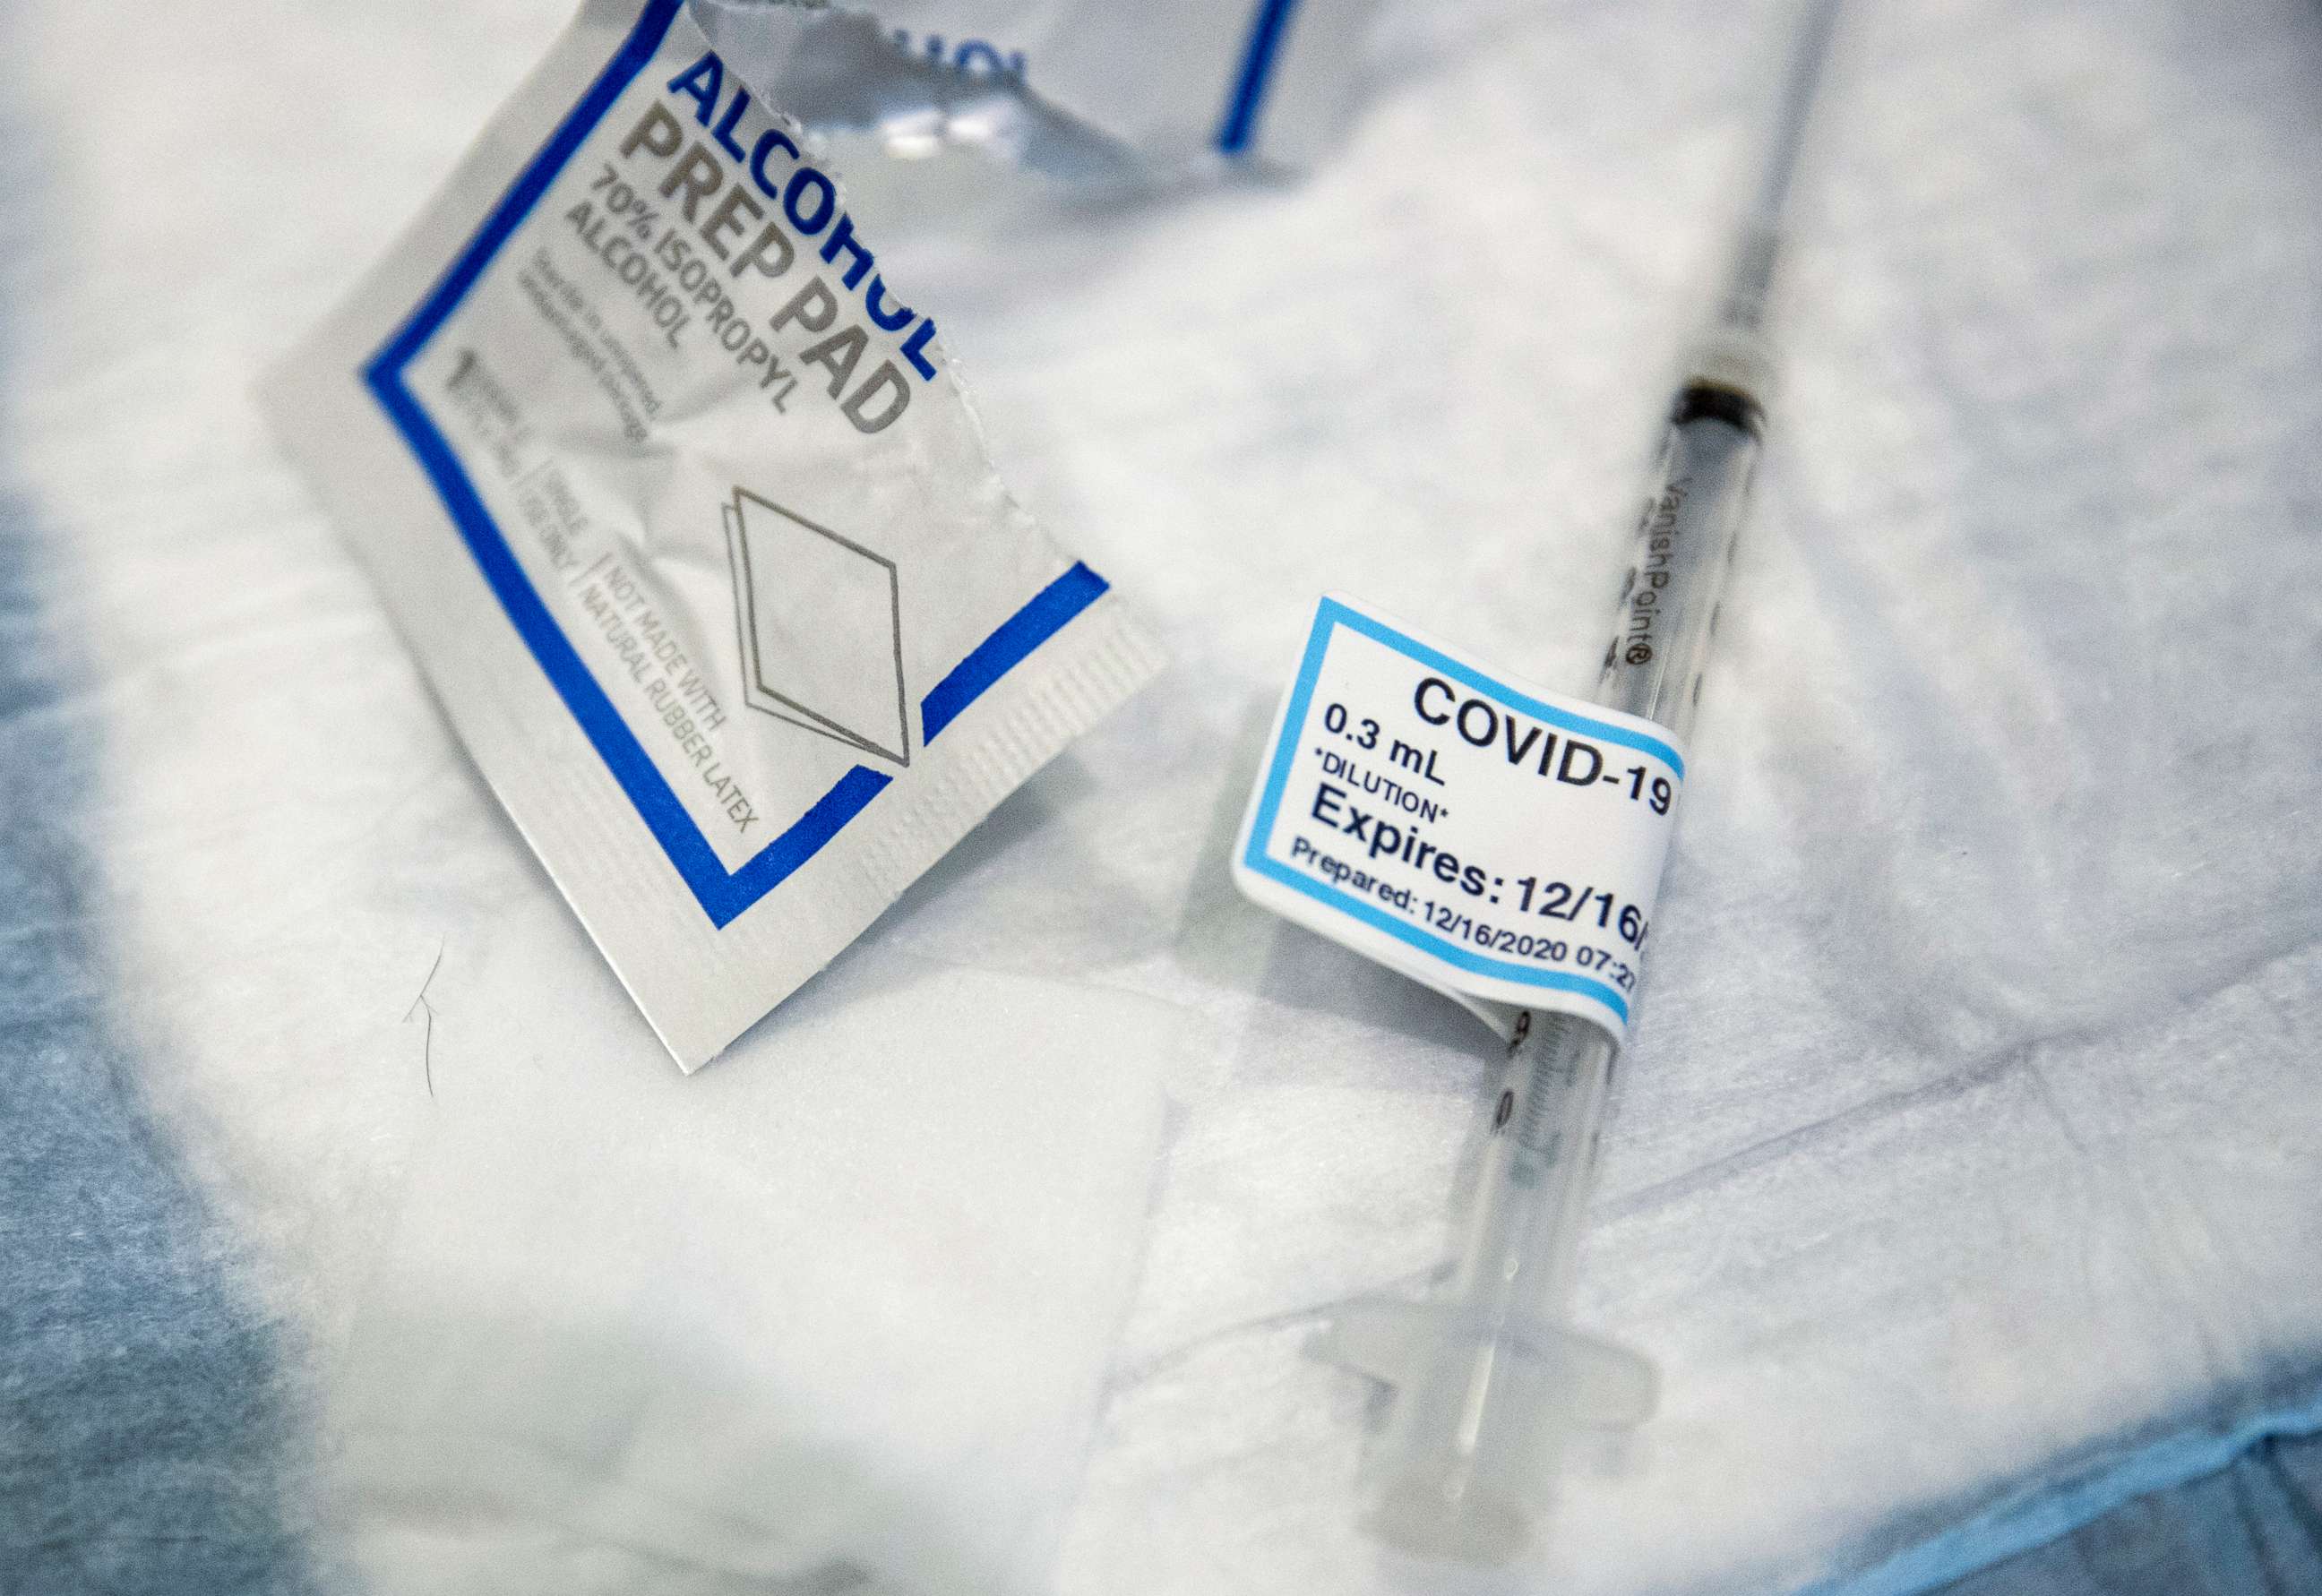 PHOTO: An empty syringe lies on a table at Ronald Reagan UCLA Medical Center after a care worker received the COVID-19 vaccine on Dec. 16, 2020, in Westwood, Calif.